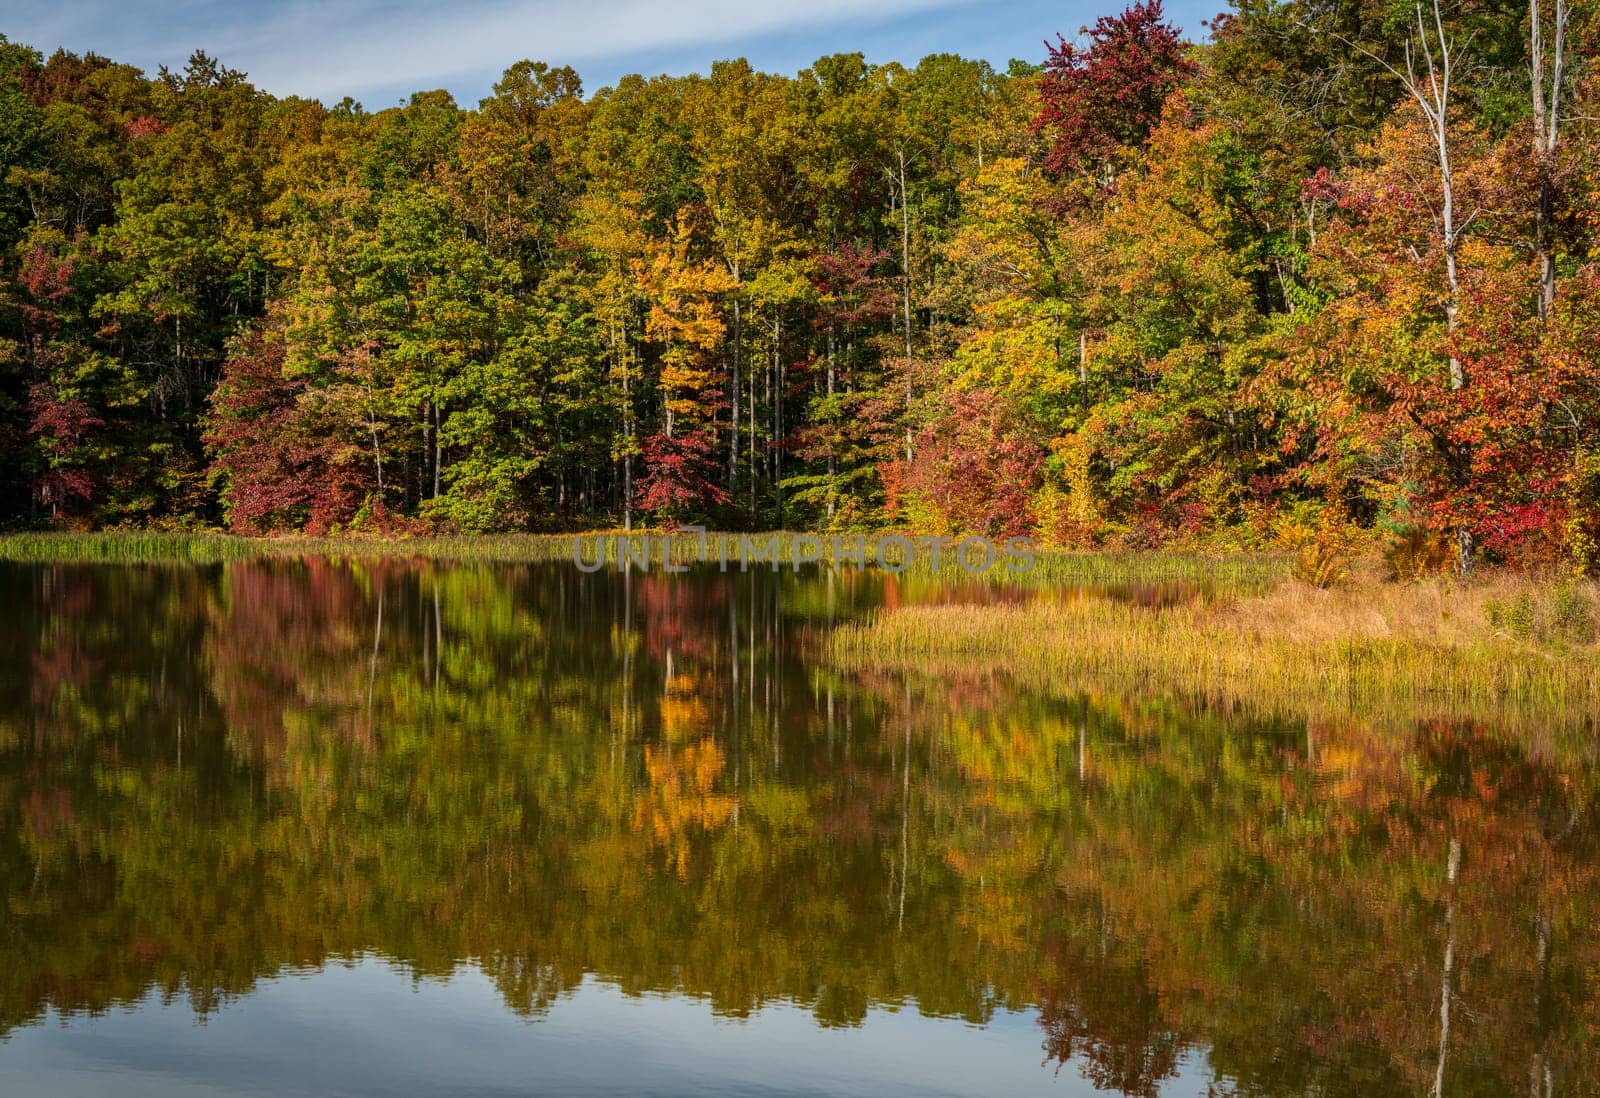 Fall leaves surround reservoir in Coopers Rock State Forest in WV by steheap